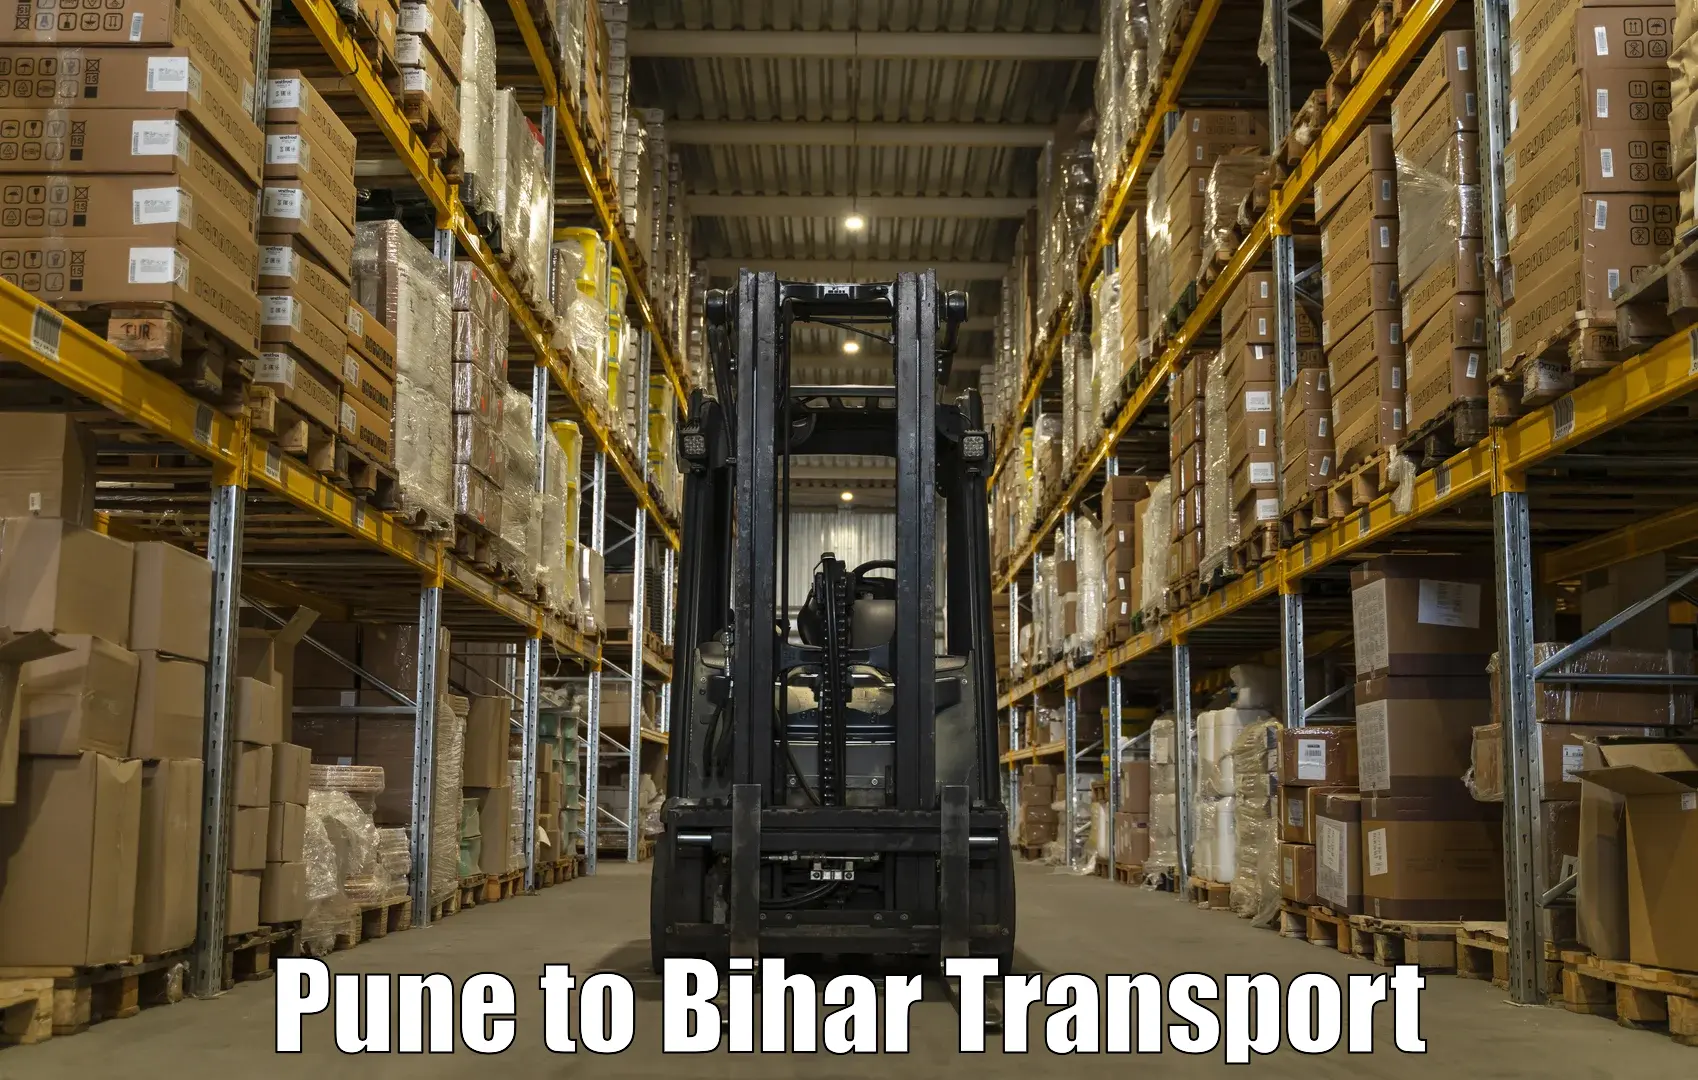 Express transport services Pune to Rajpur